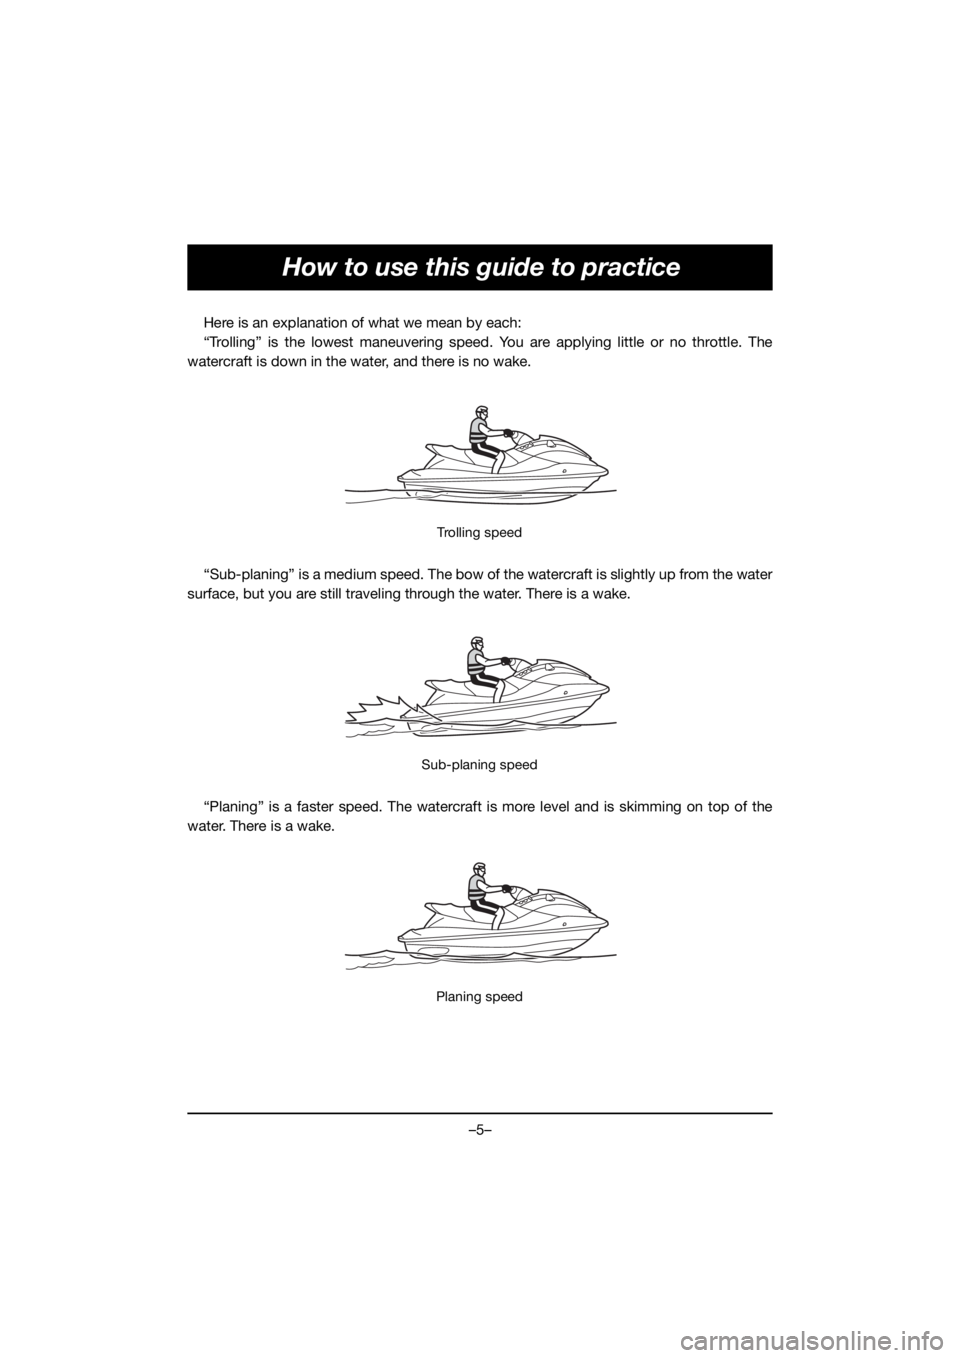 YAMAHA EX DELUXE 2020  Manual de utilização (in Portuguese) –5–
How to use this guide to practice
Here is an explanation of what we mean by each:
“Trolling” is the lowest maneuvering speed. You are applying little or no throttle. The
watercraft is down